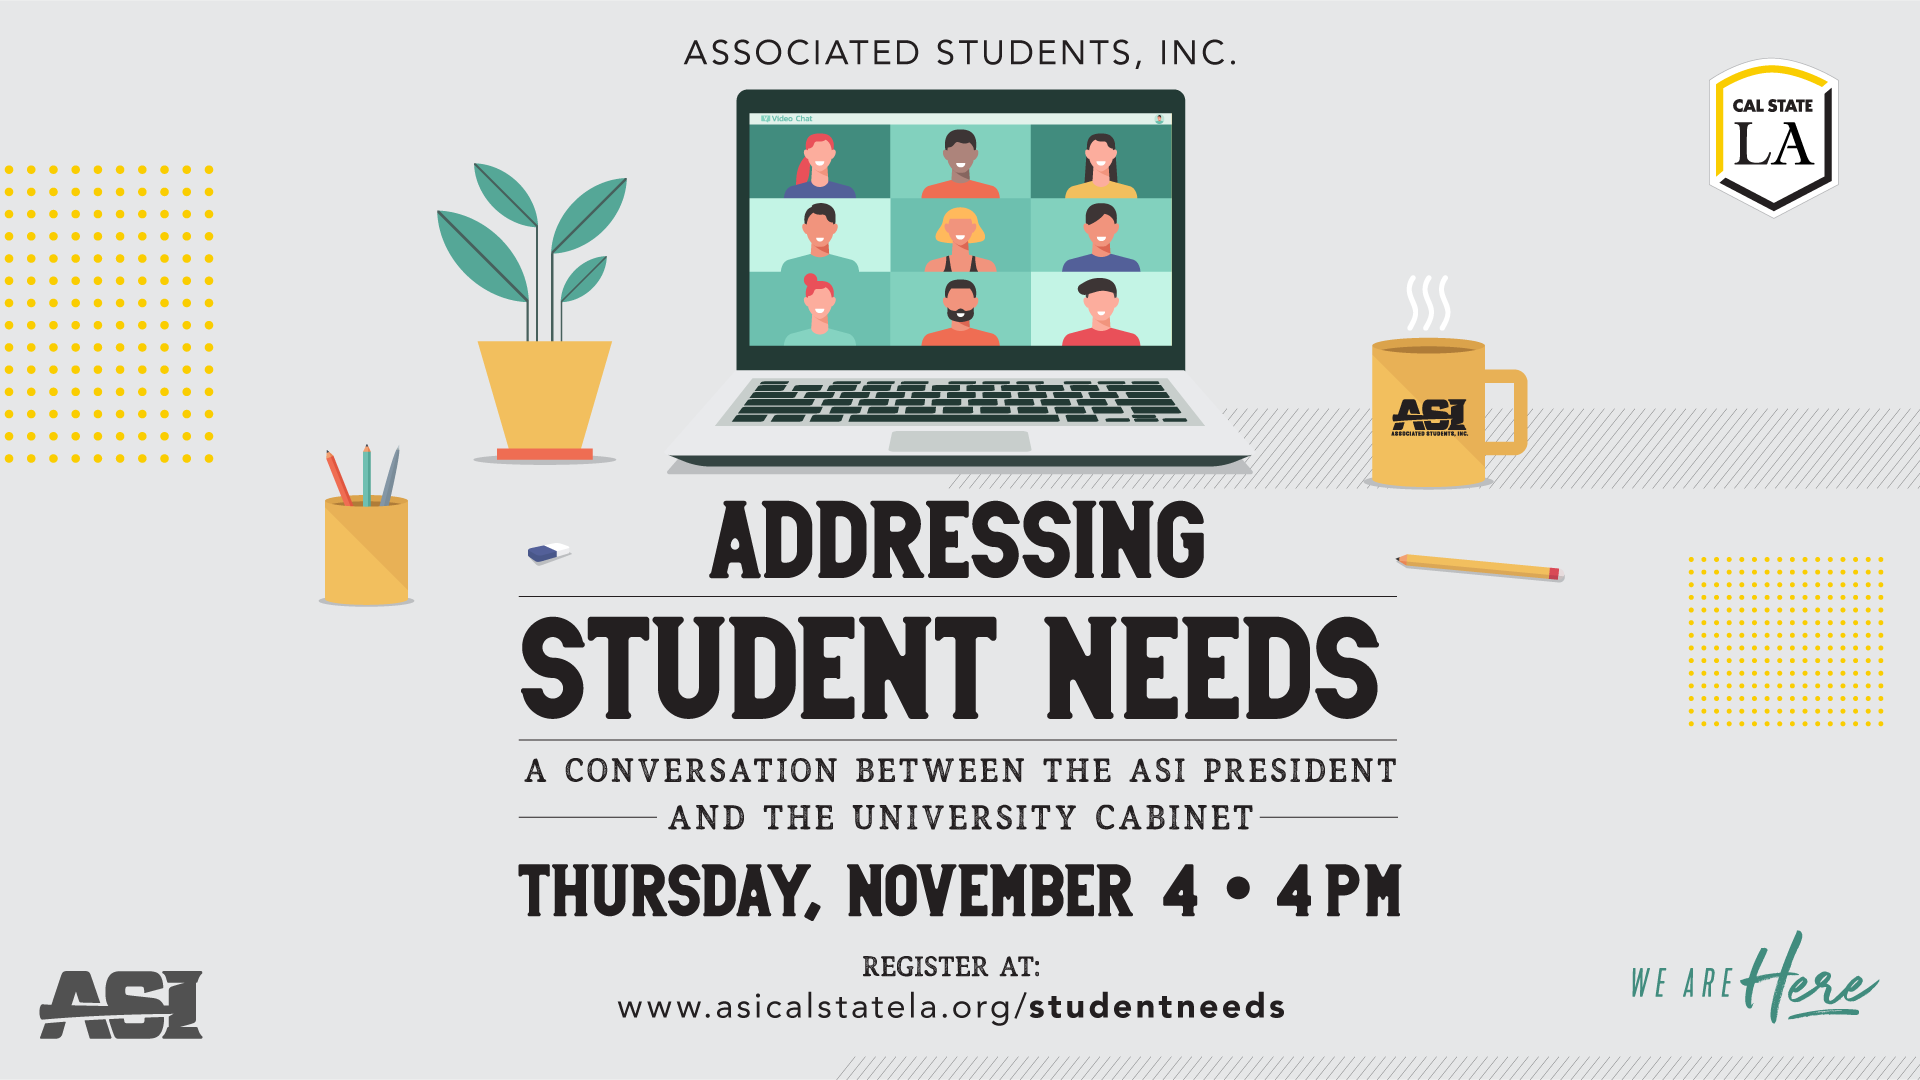 Addressing Student Needs: A Conversation between the ASI President and the University Cabinet